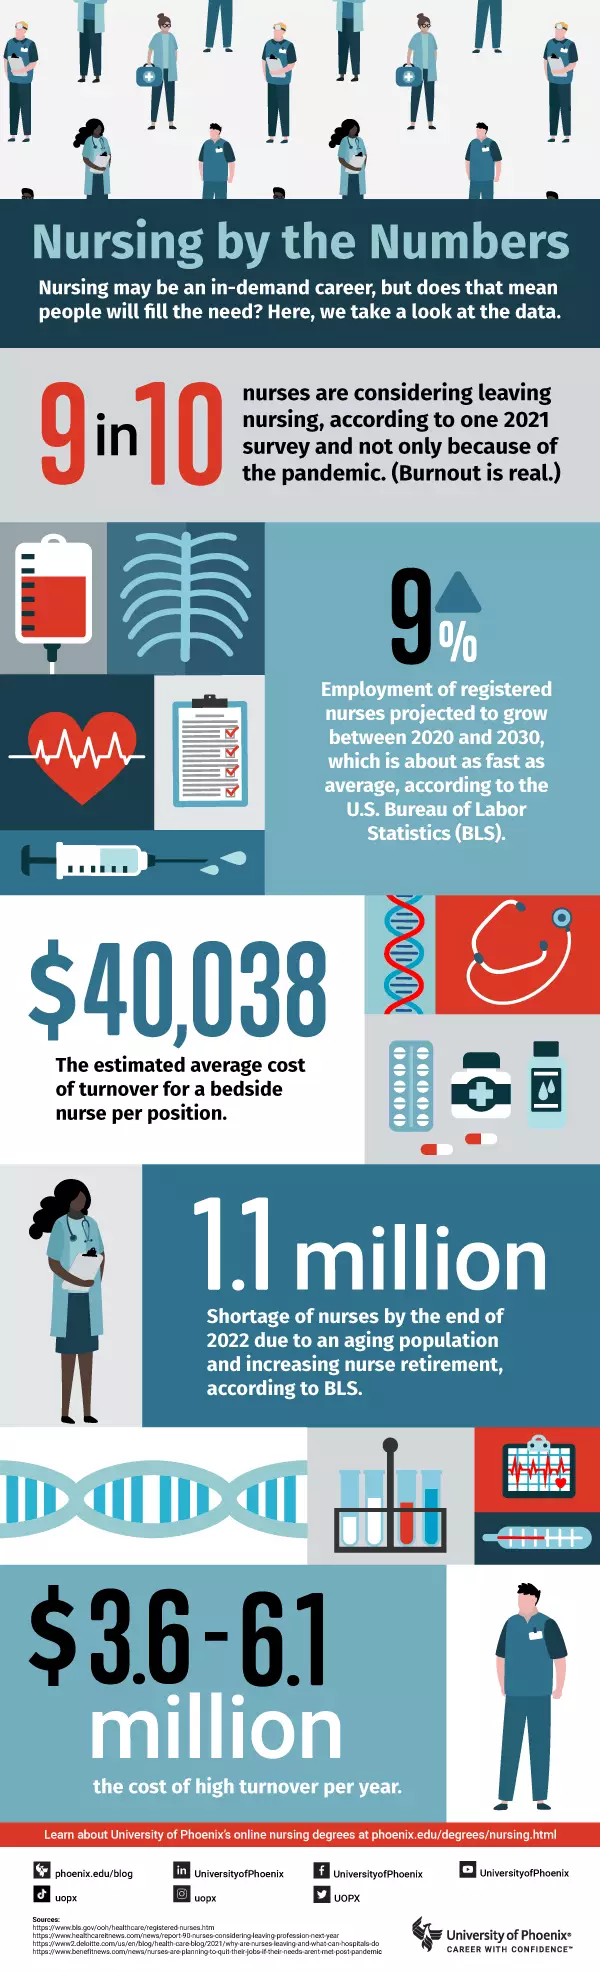 Nursing by the numbers: An Infographic